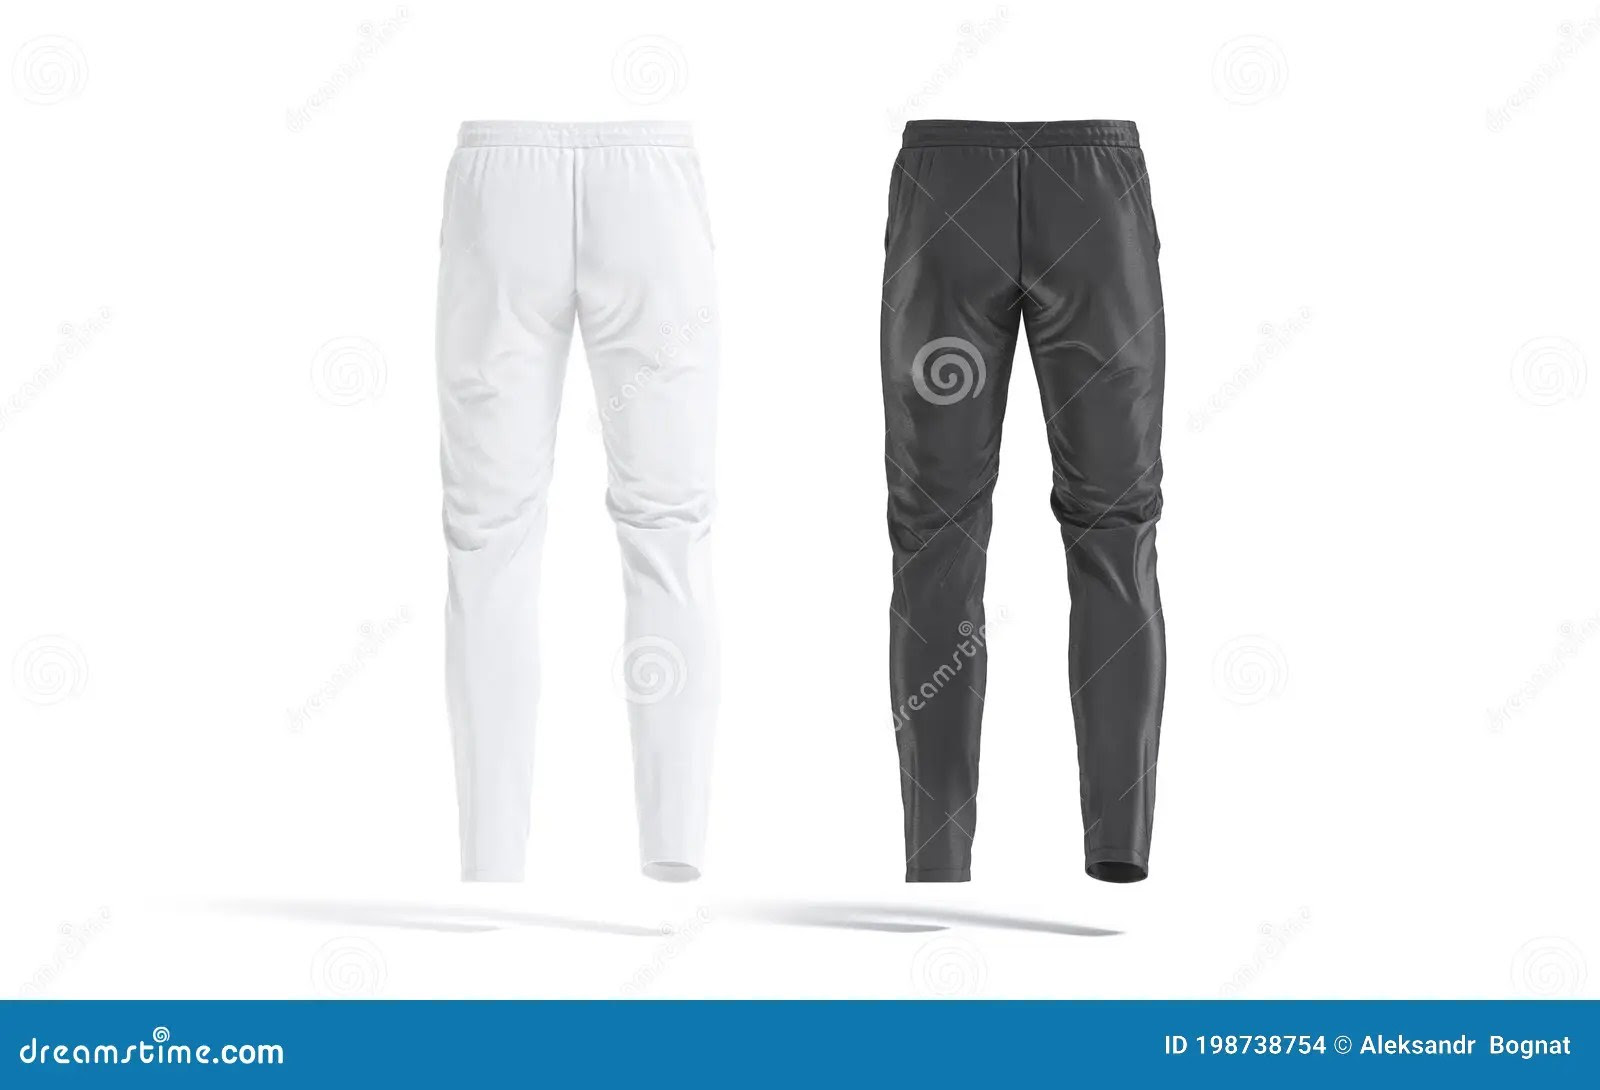 329+ Sweatpants With Cord Mockup Back View Best Free Mockups